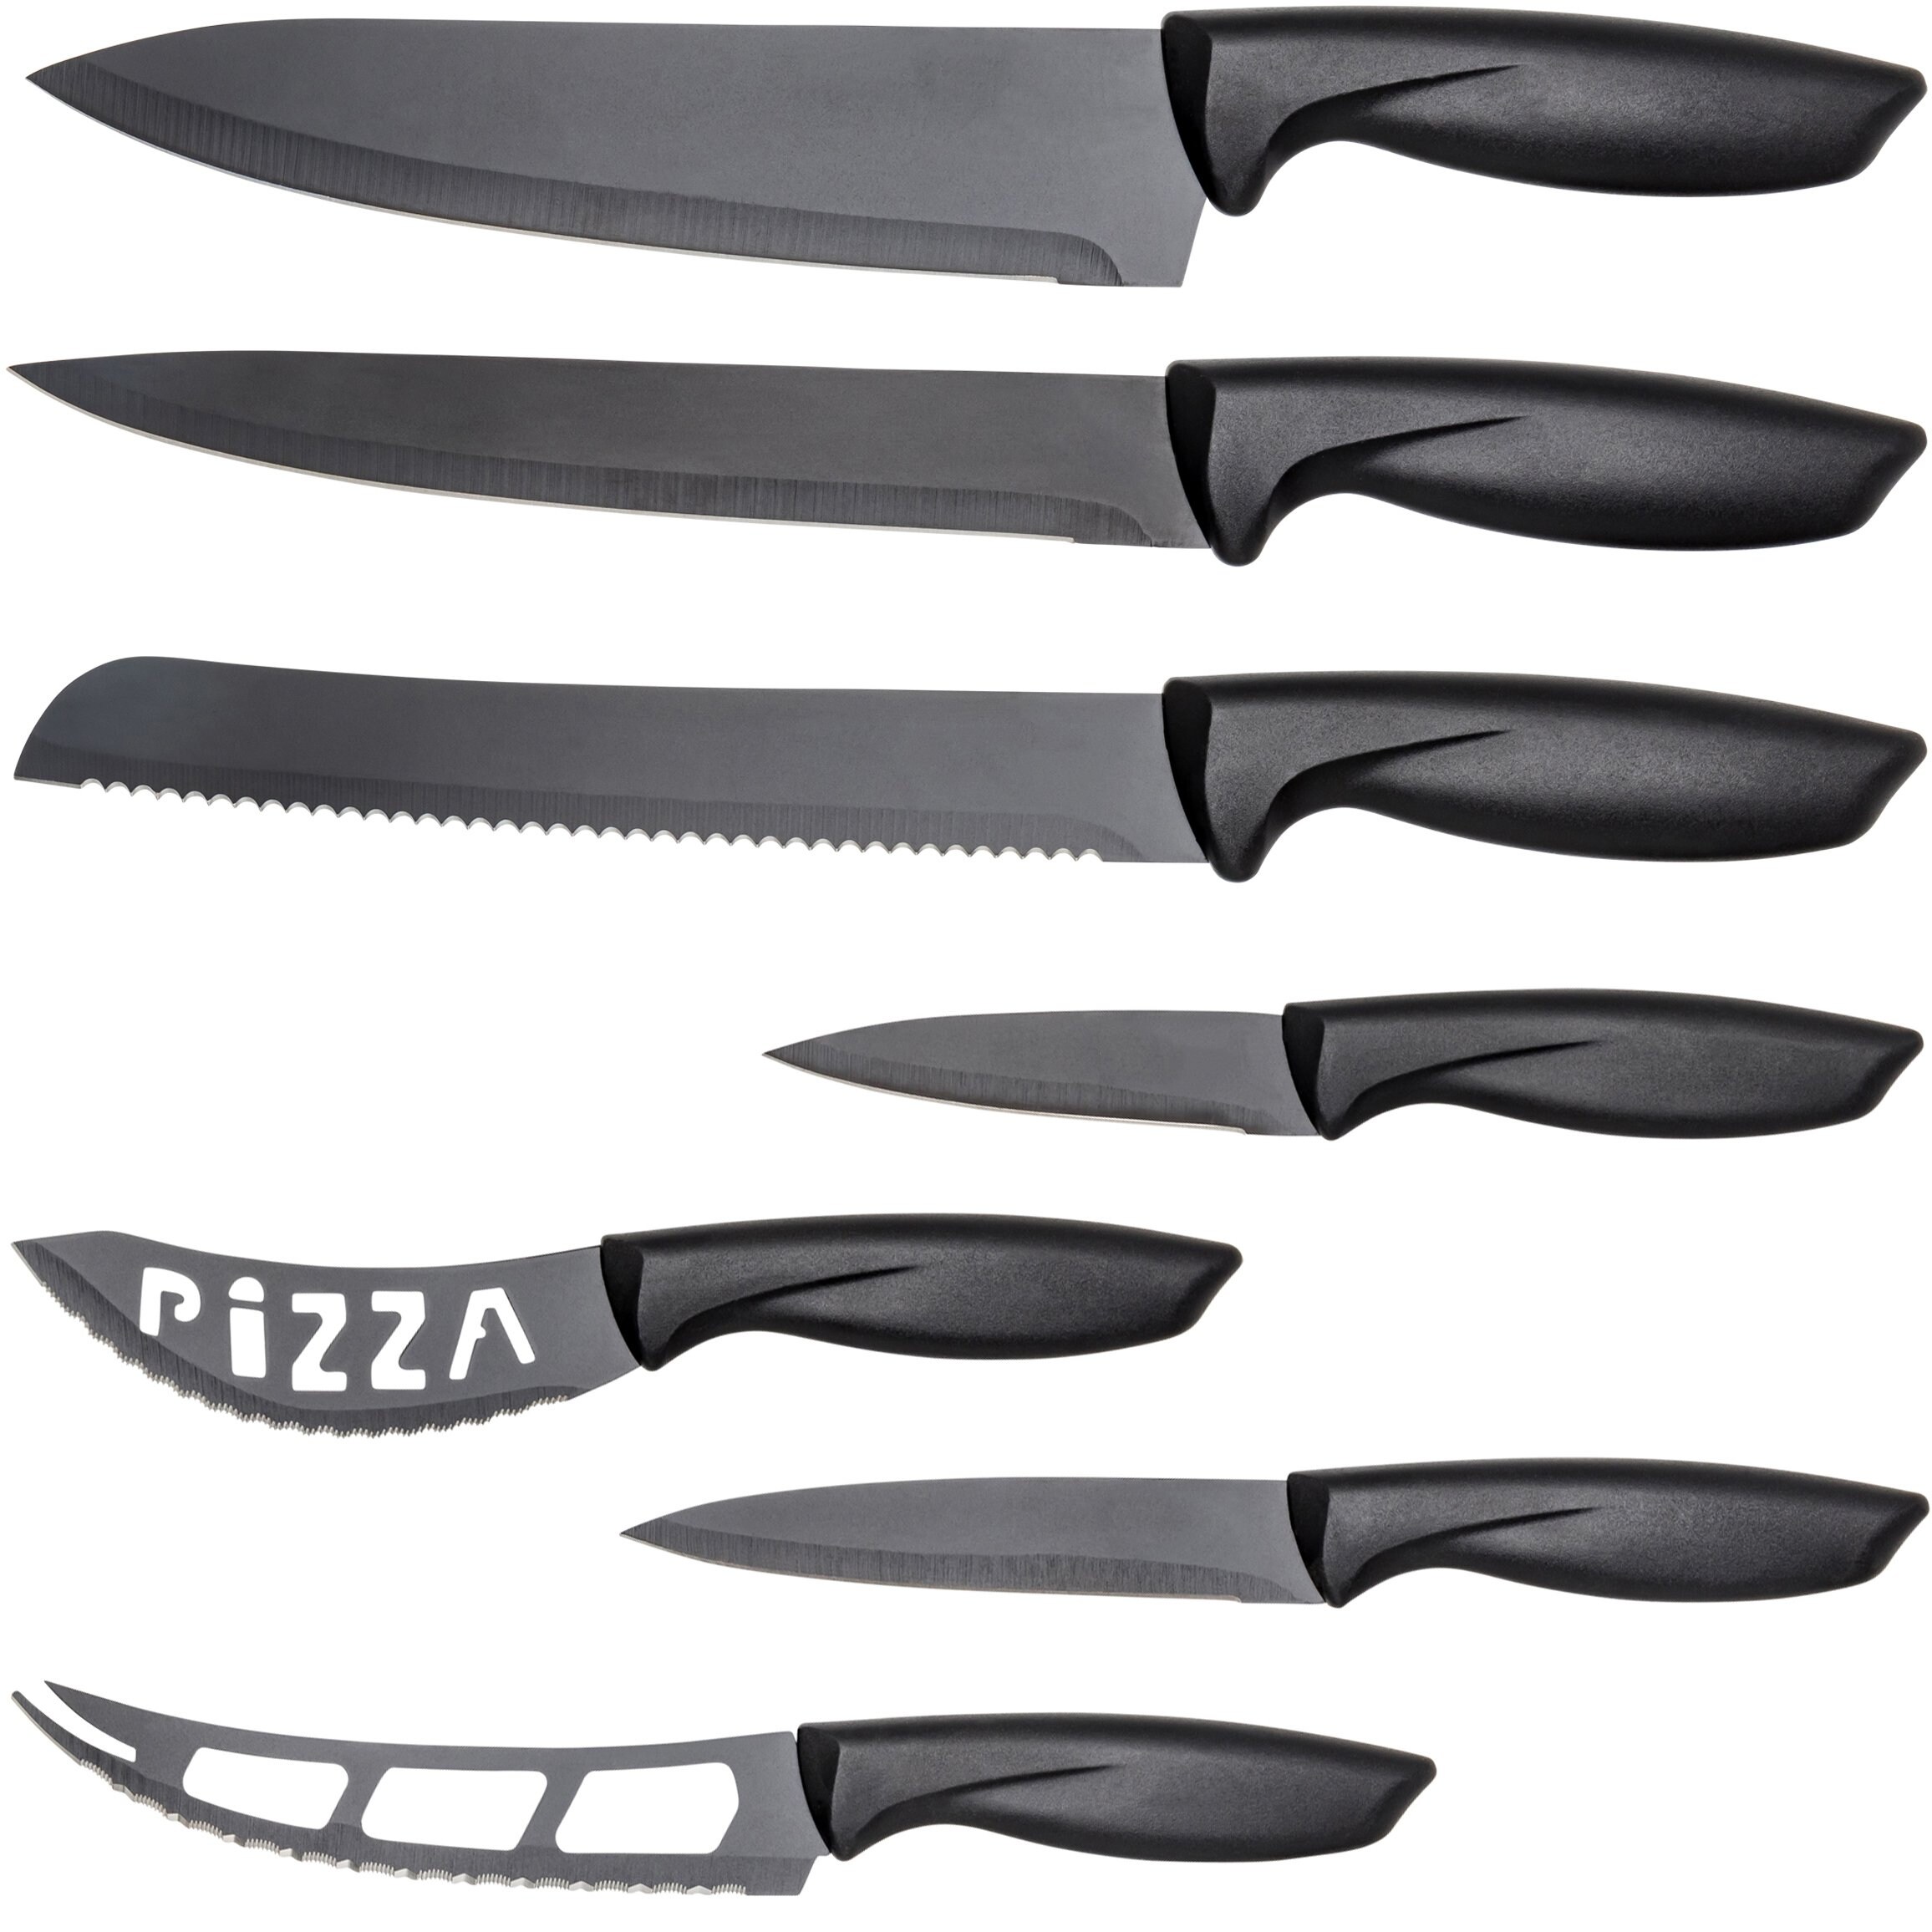 Stainless Steel Multi Use Kitchen Knife Set Set Of 7 Quick